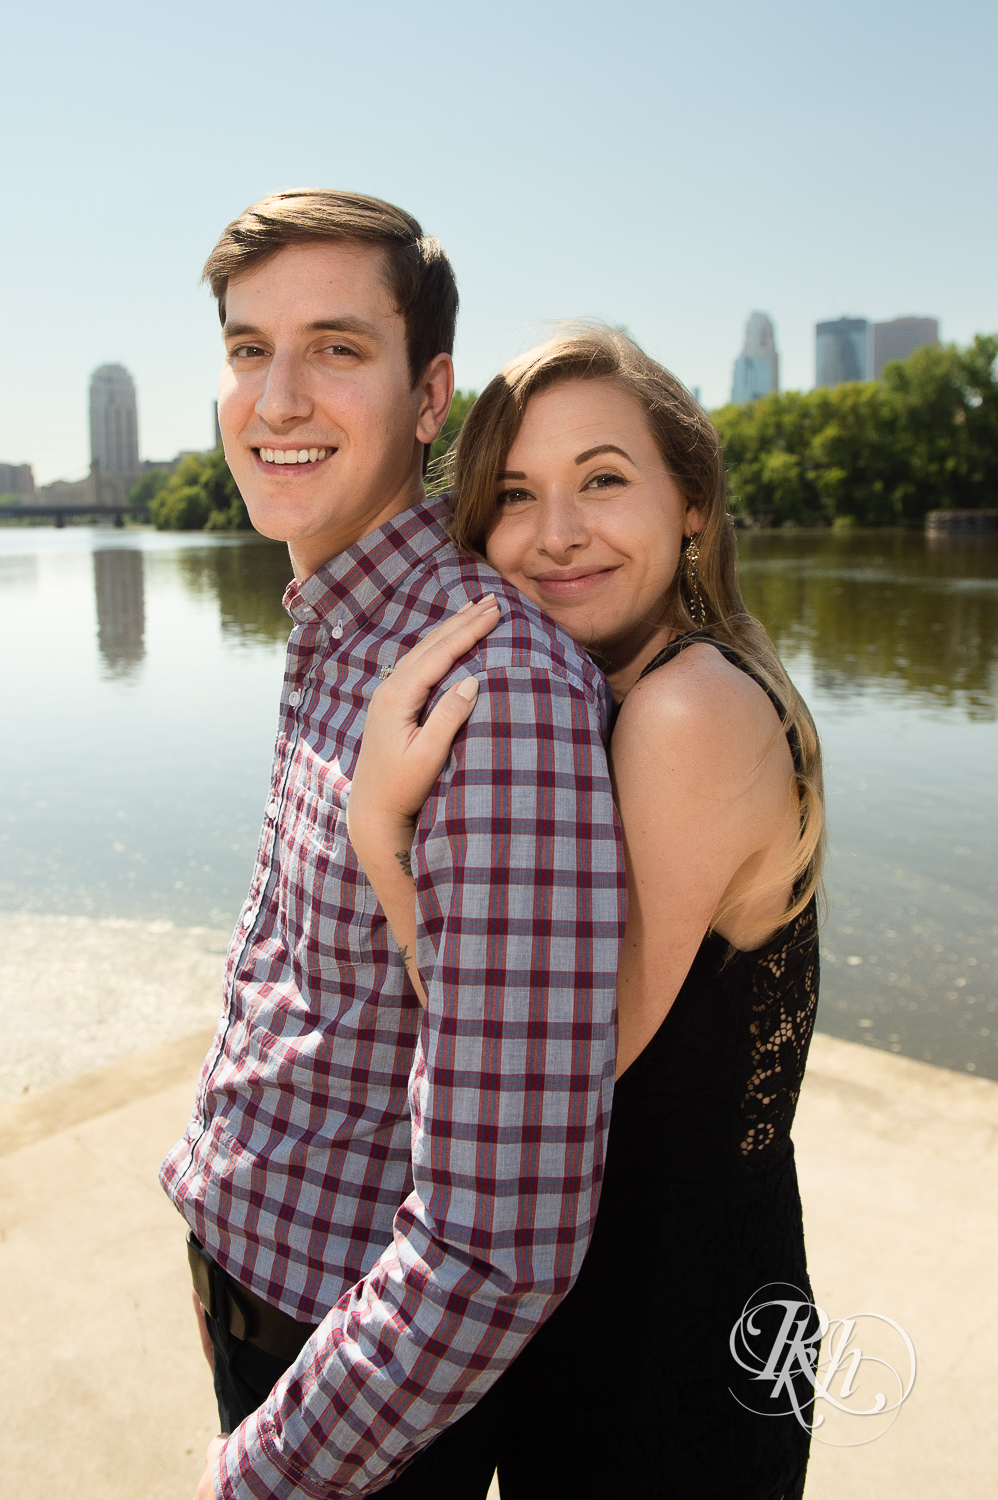 Man and woman in black lace dress smile in front of river during summer Boom Island Park engagement photos in Minneapolis, Minnesota.